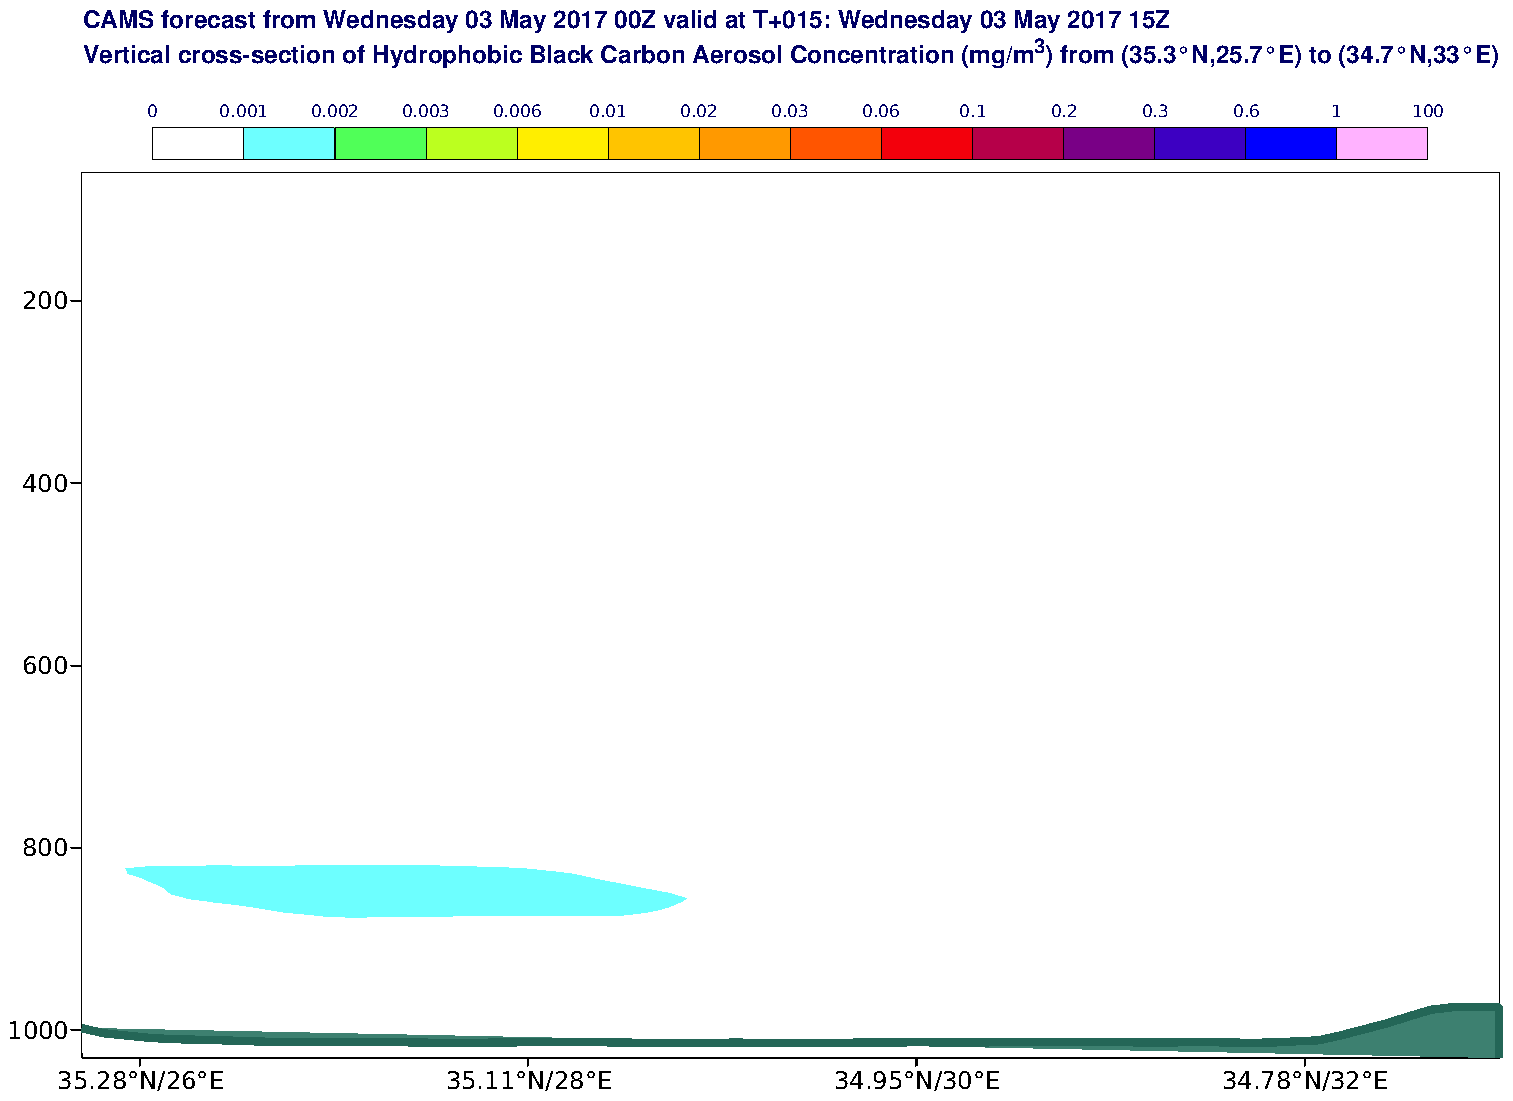 Vertical cross-section of Hydrophobic Black Carbon Aerosol Concentration (mg/m3) valid at T15 - 2017-05-03 15:00